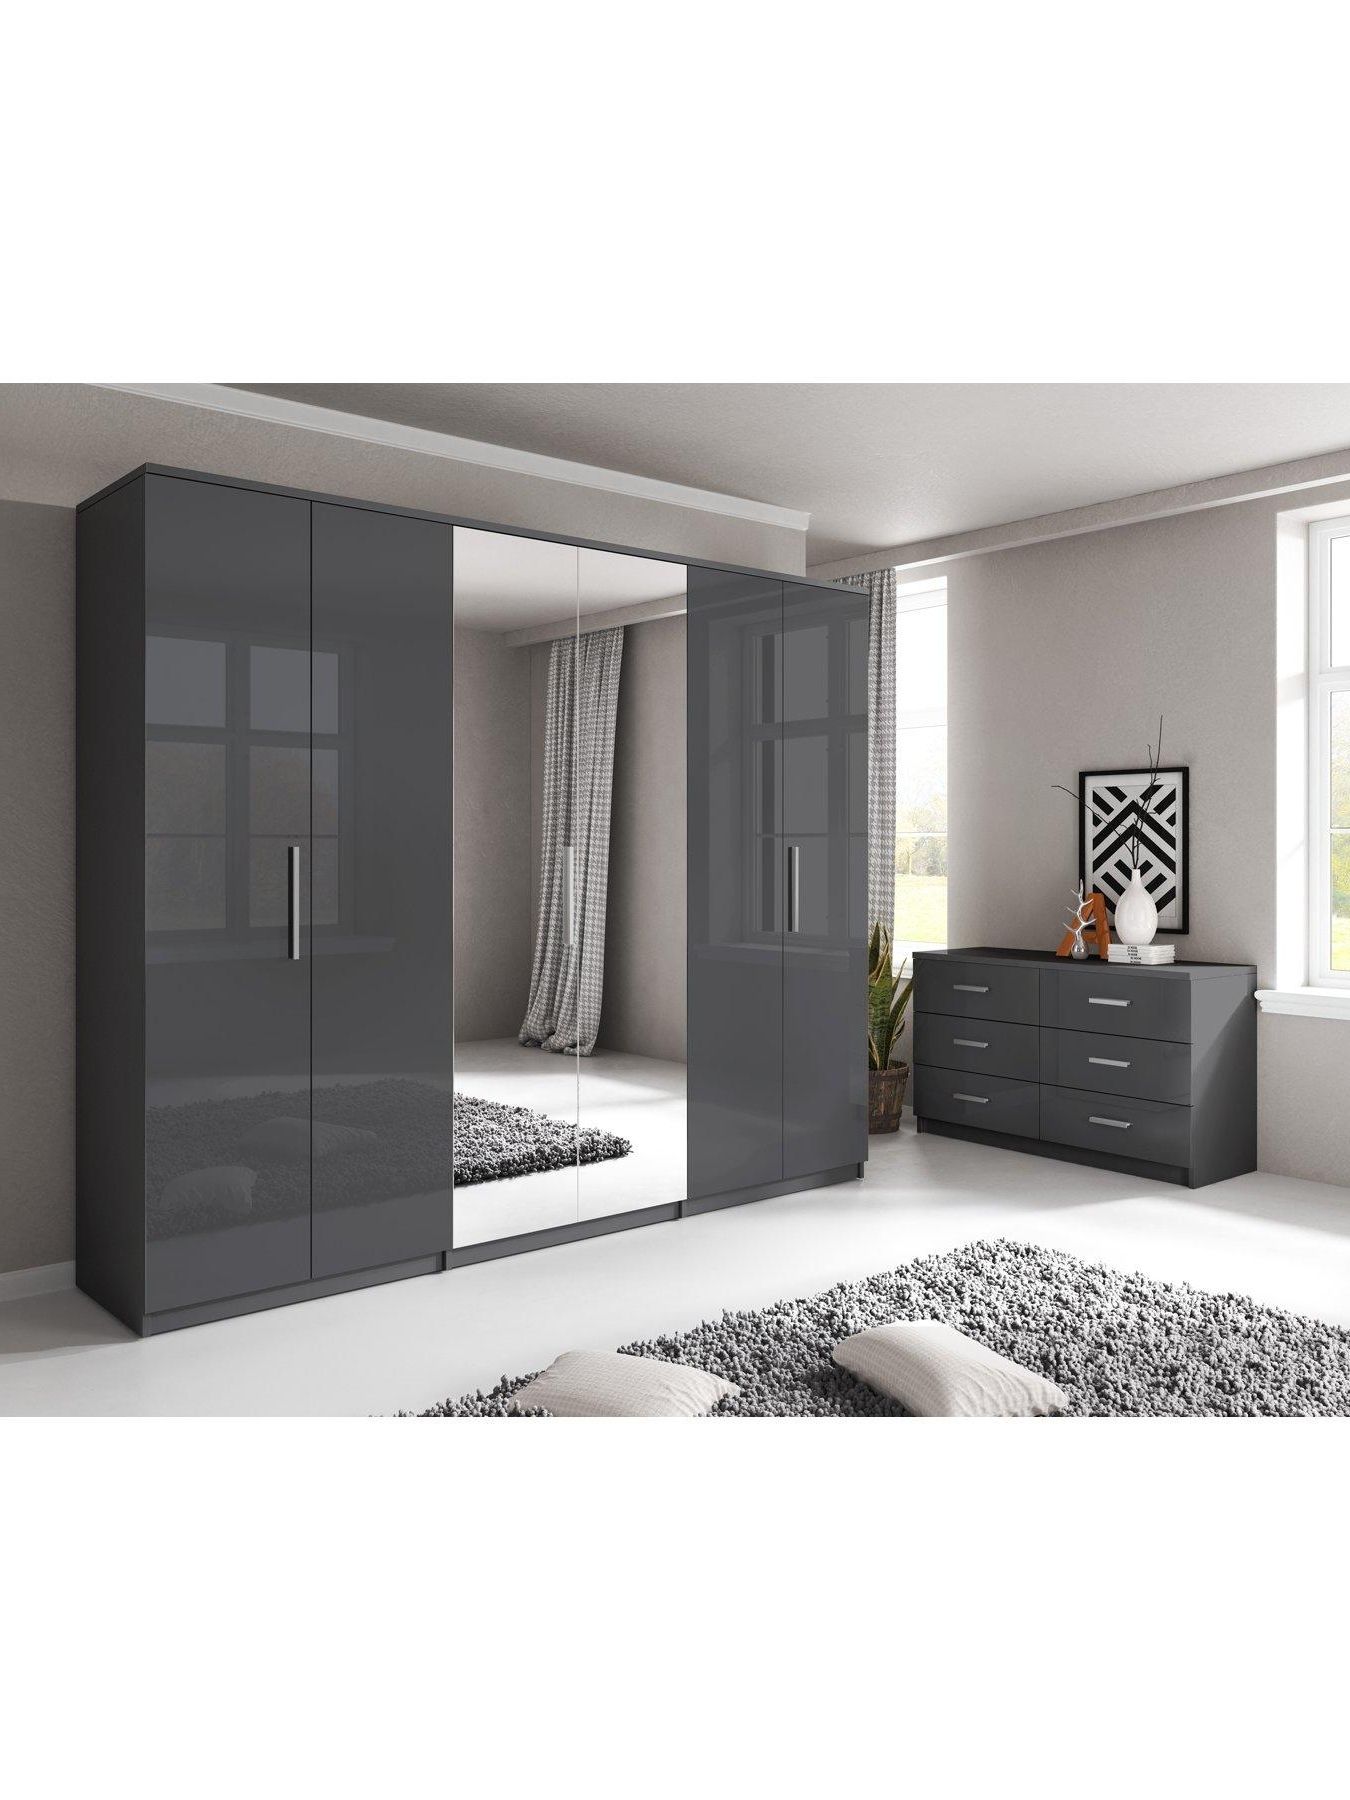 White Gloss Mirrored Wardrobes With Regard To Favorite Prague Gloss 6 Door Mirrored Wardrobe (View 10 of 15)